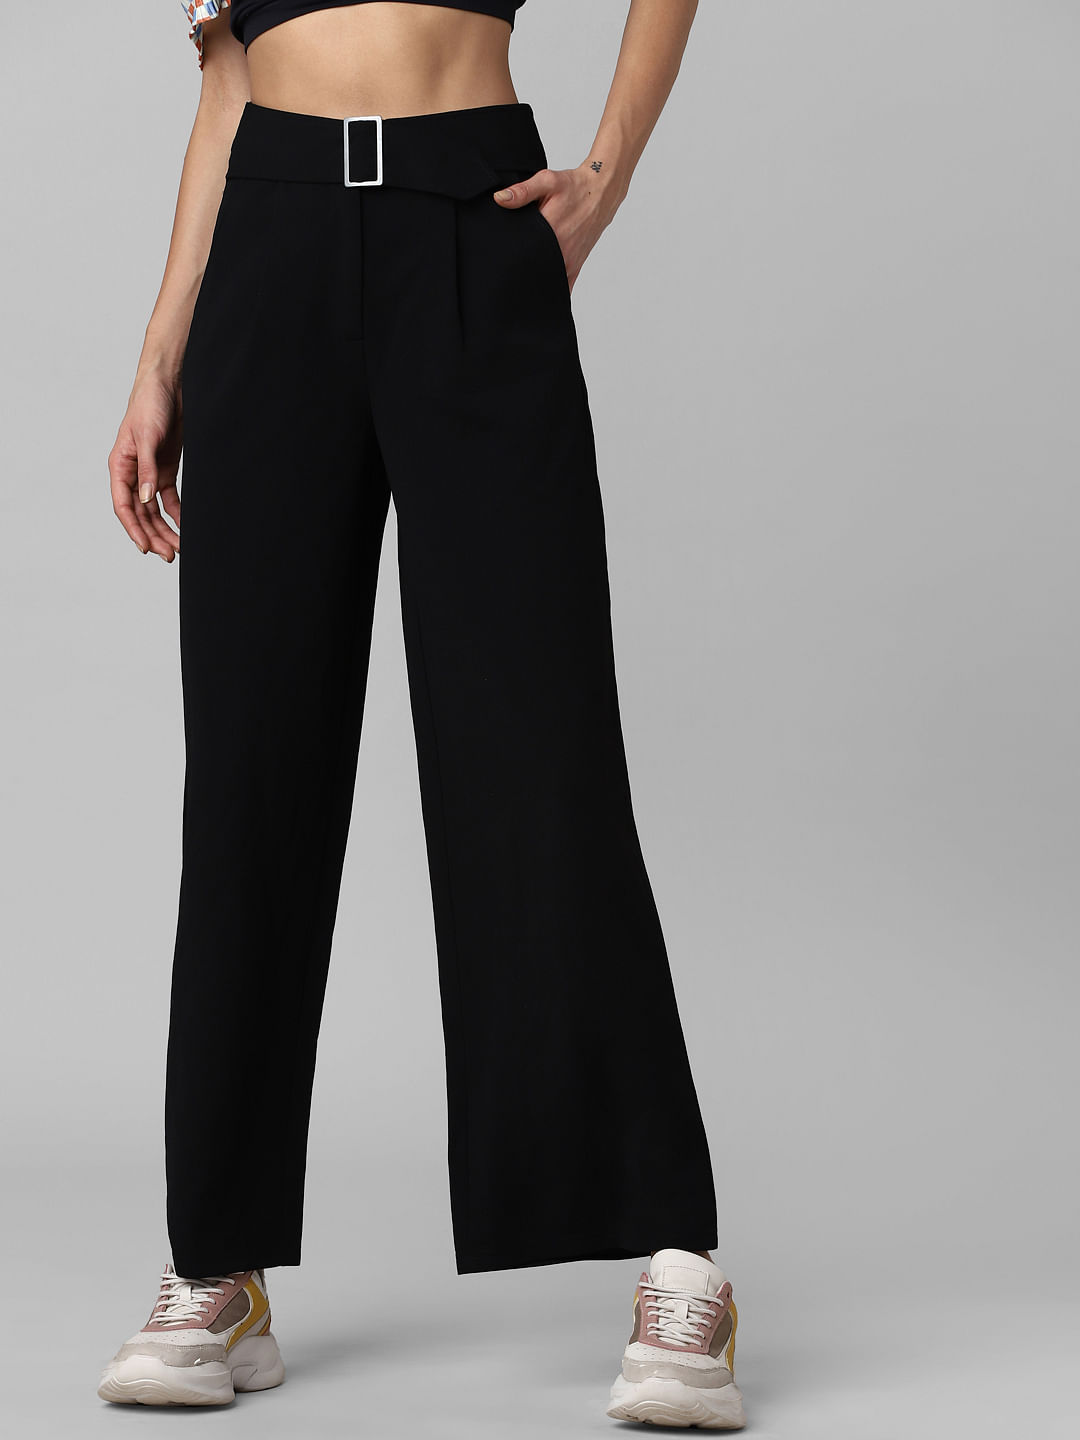 Pants for women | Buy online | ABOUT YOU